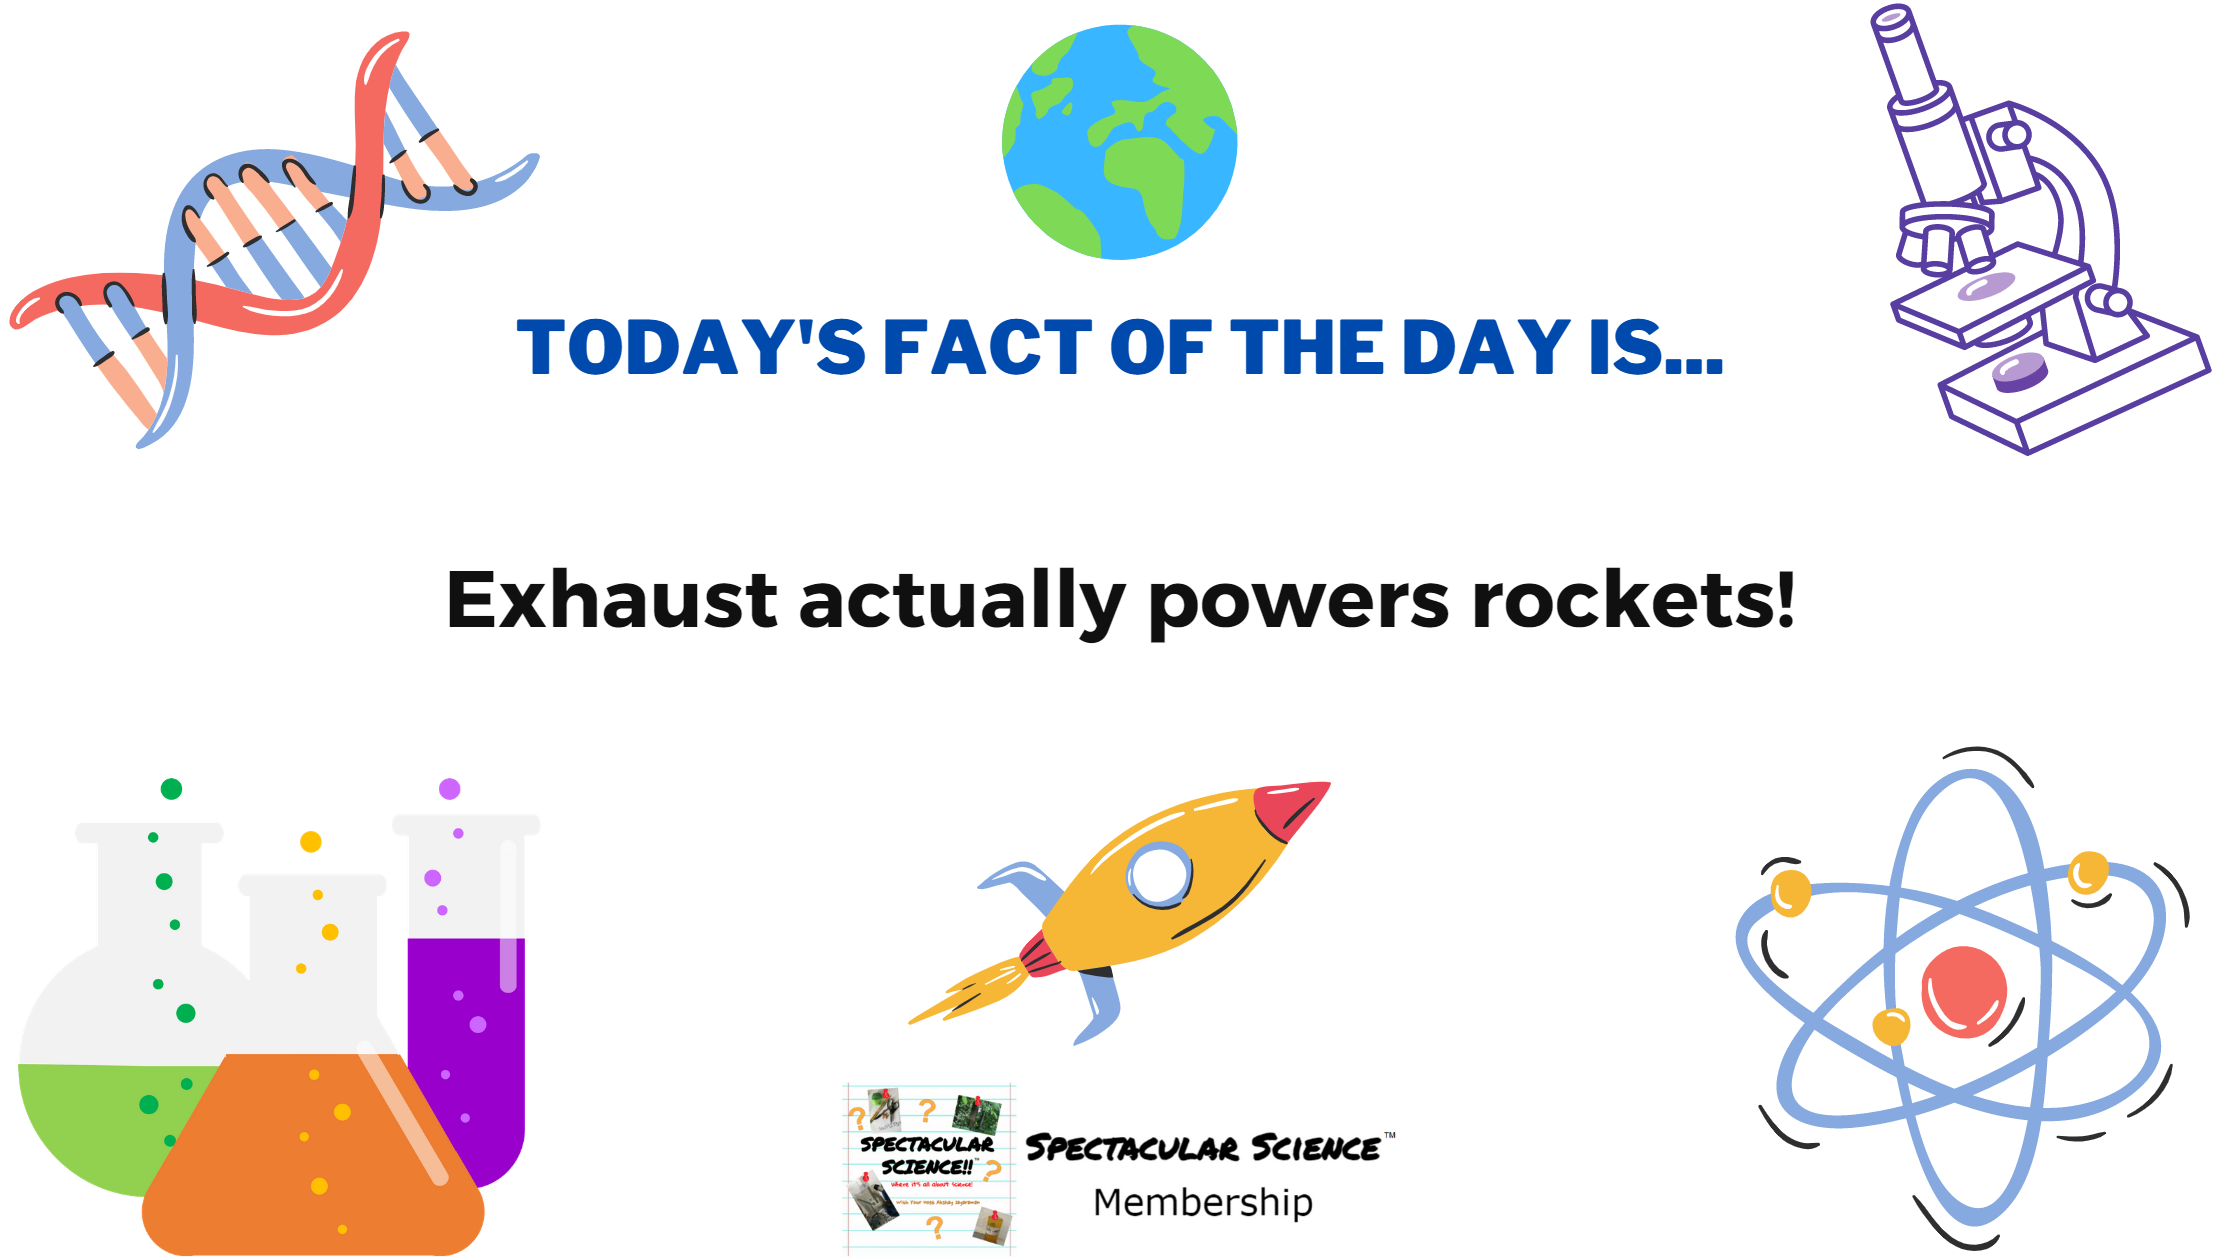 Fact of the Day Image February 27th